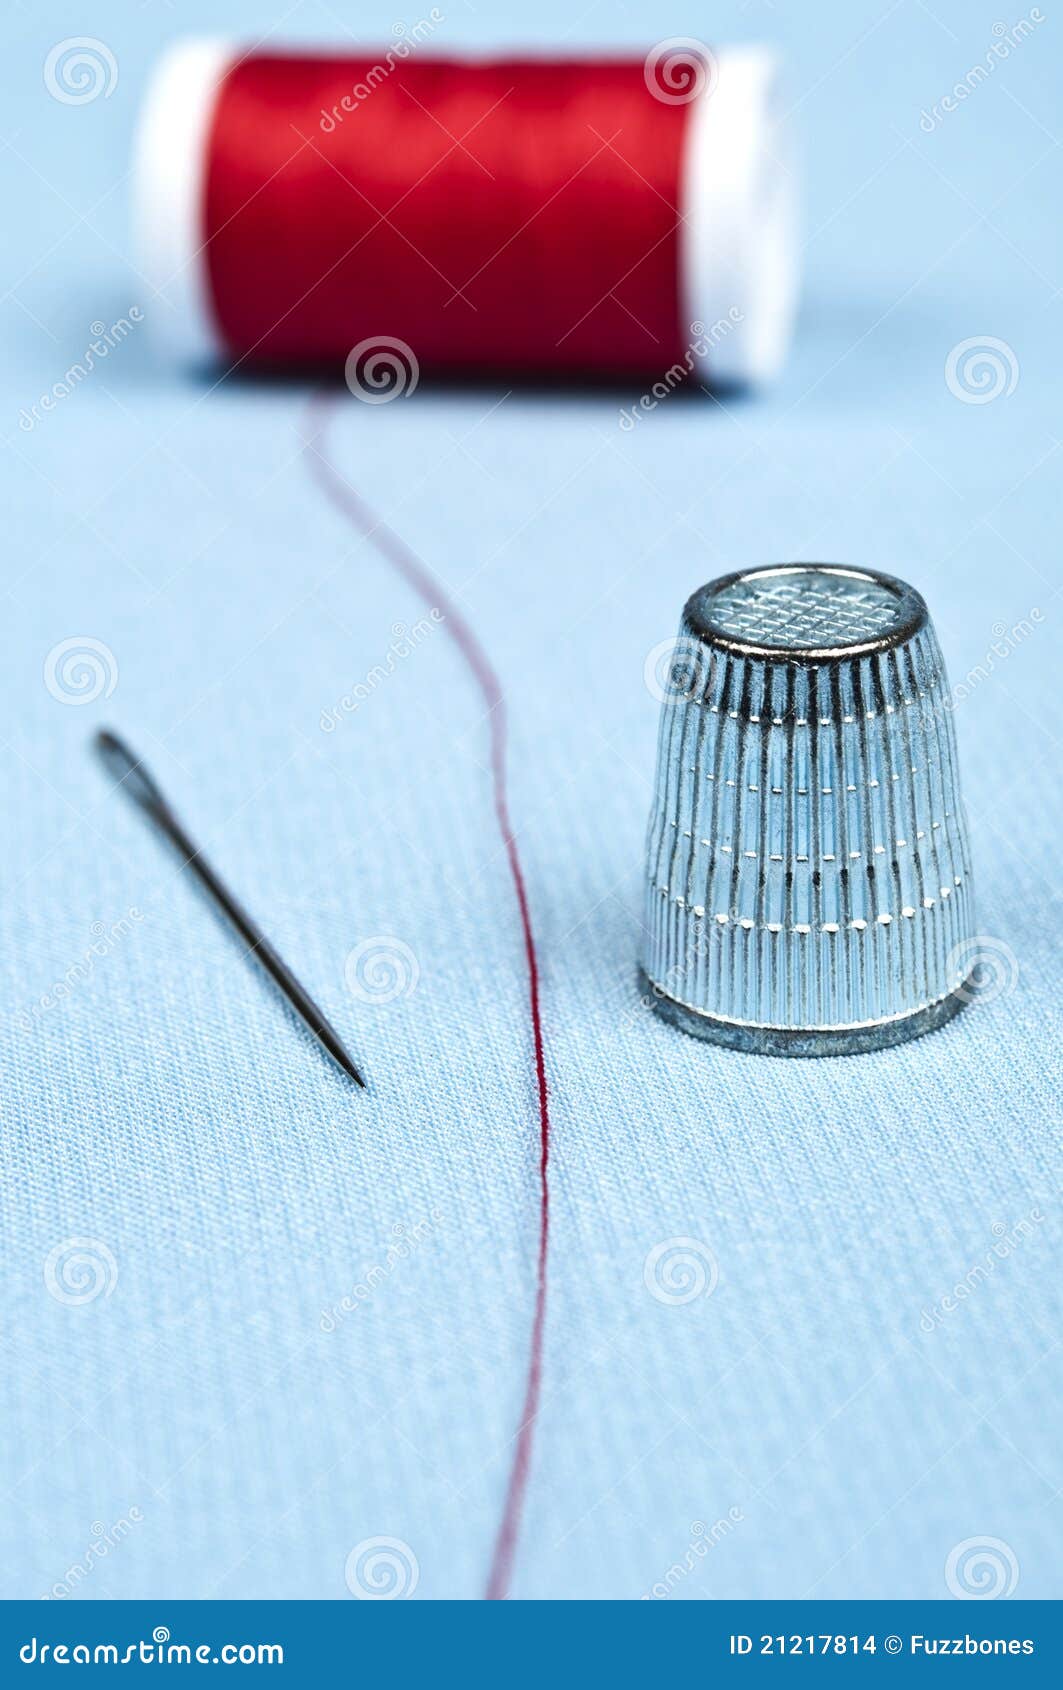 Thimble and thread stock photo. Image of background, textile - 21217814